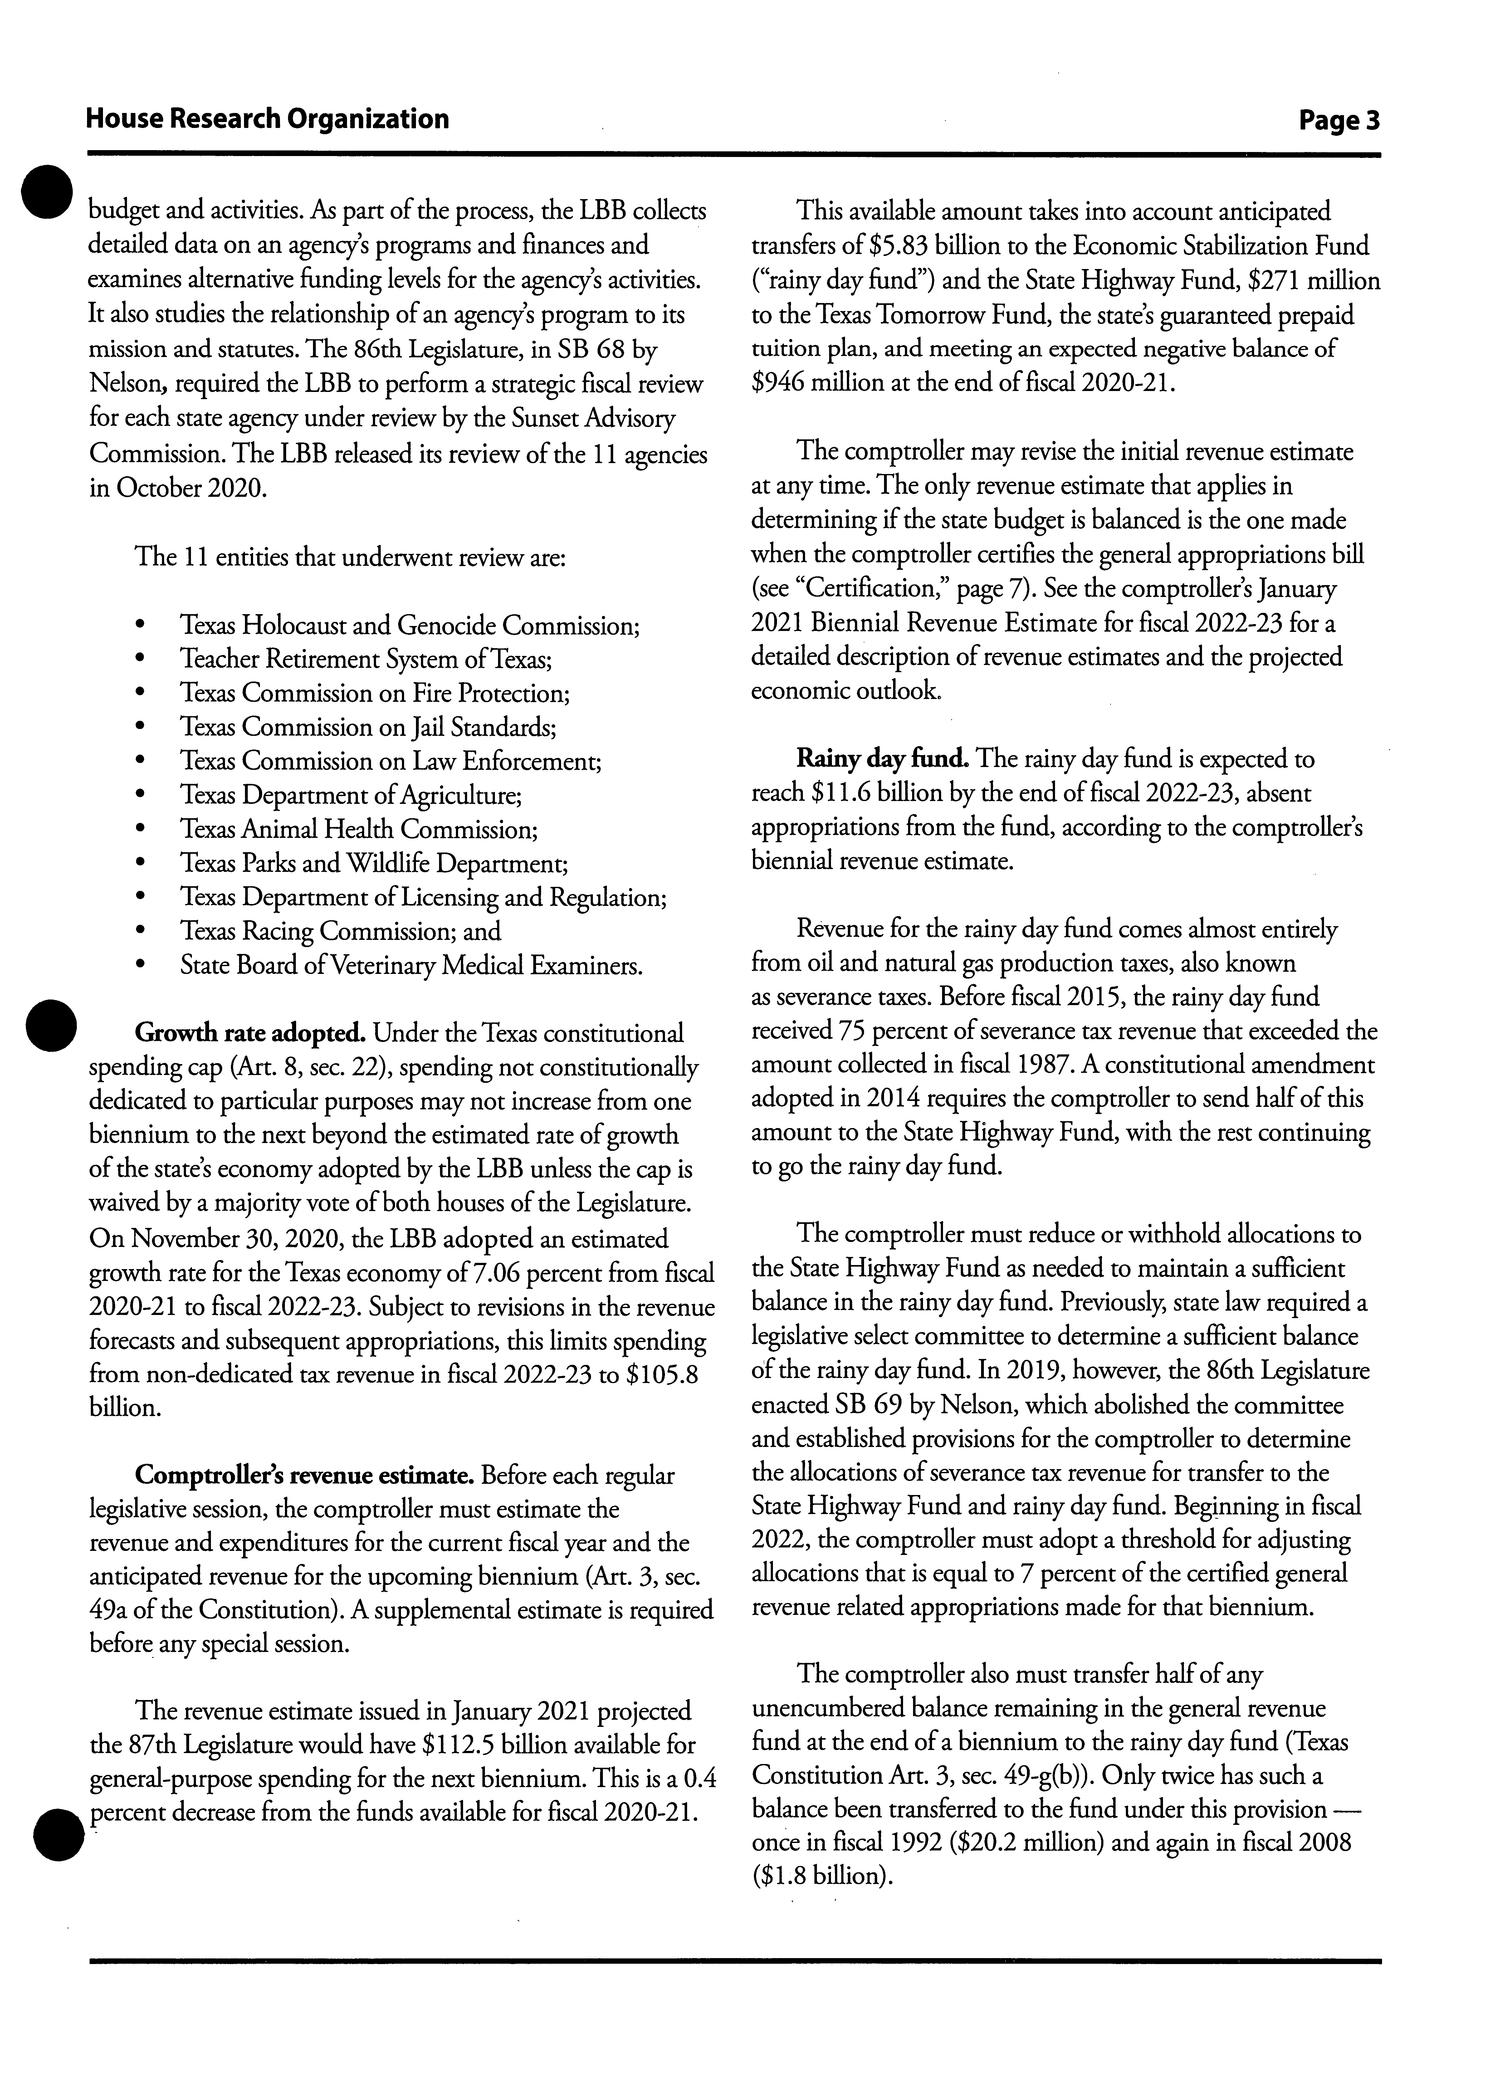 Focus Report, Volume 87, Number 1, March 2021
                                                
                                                    PAGE3
                                                